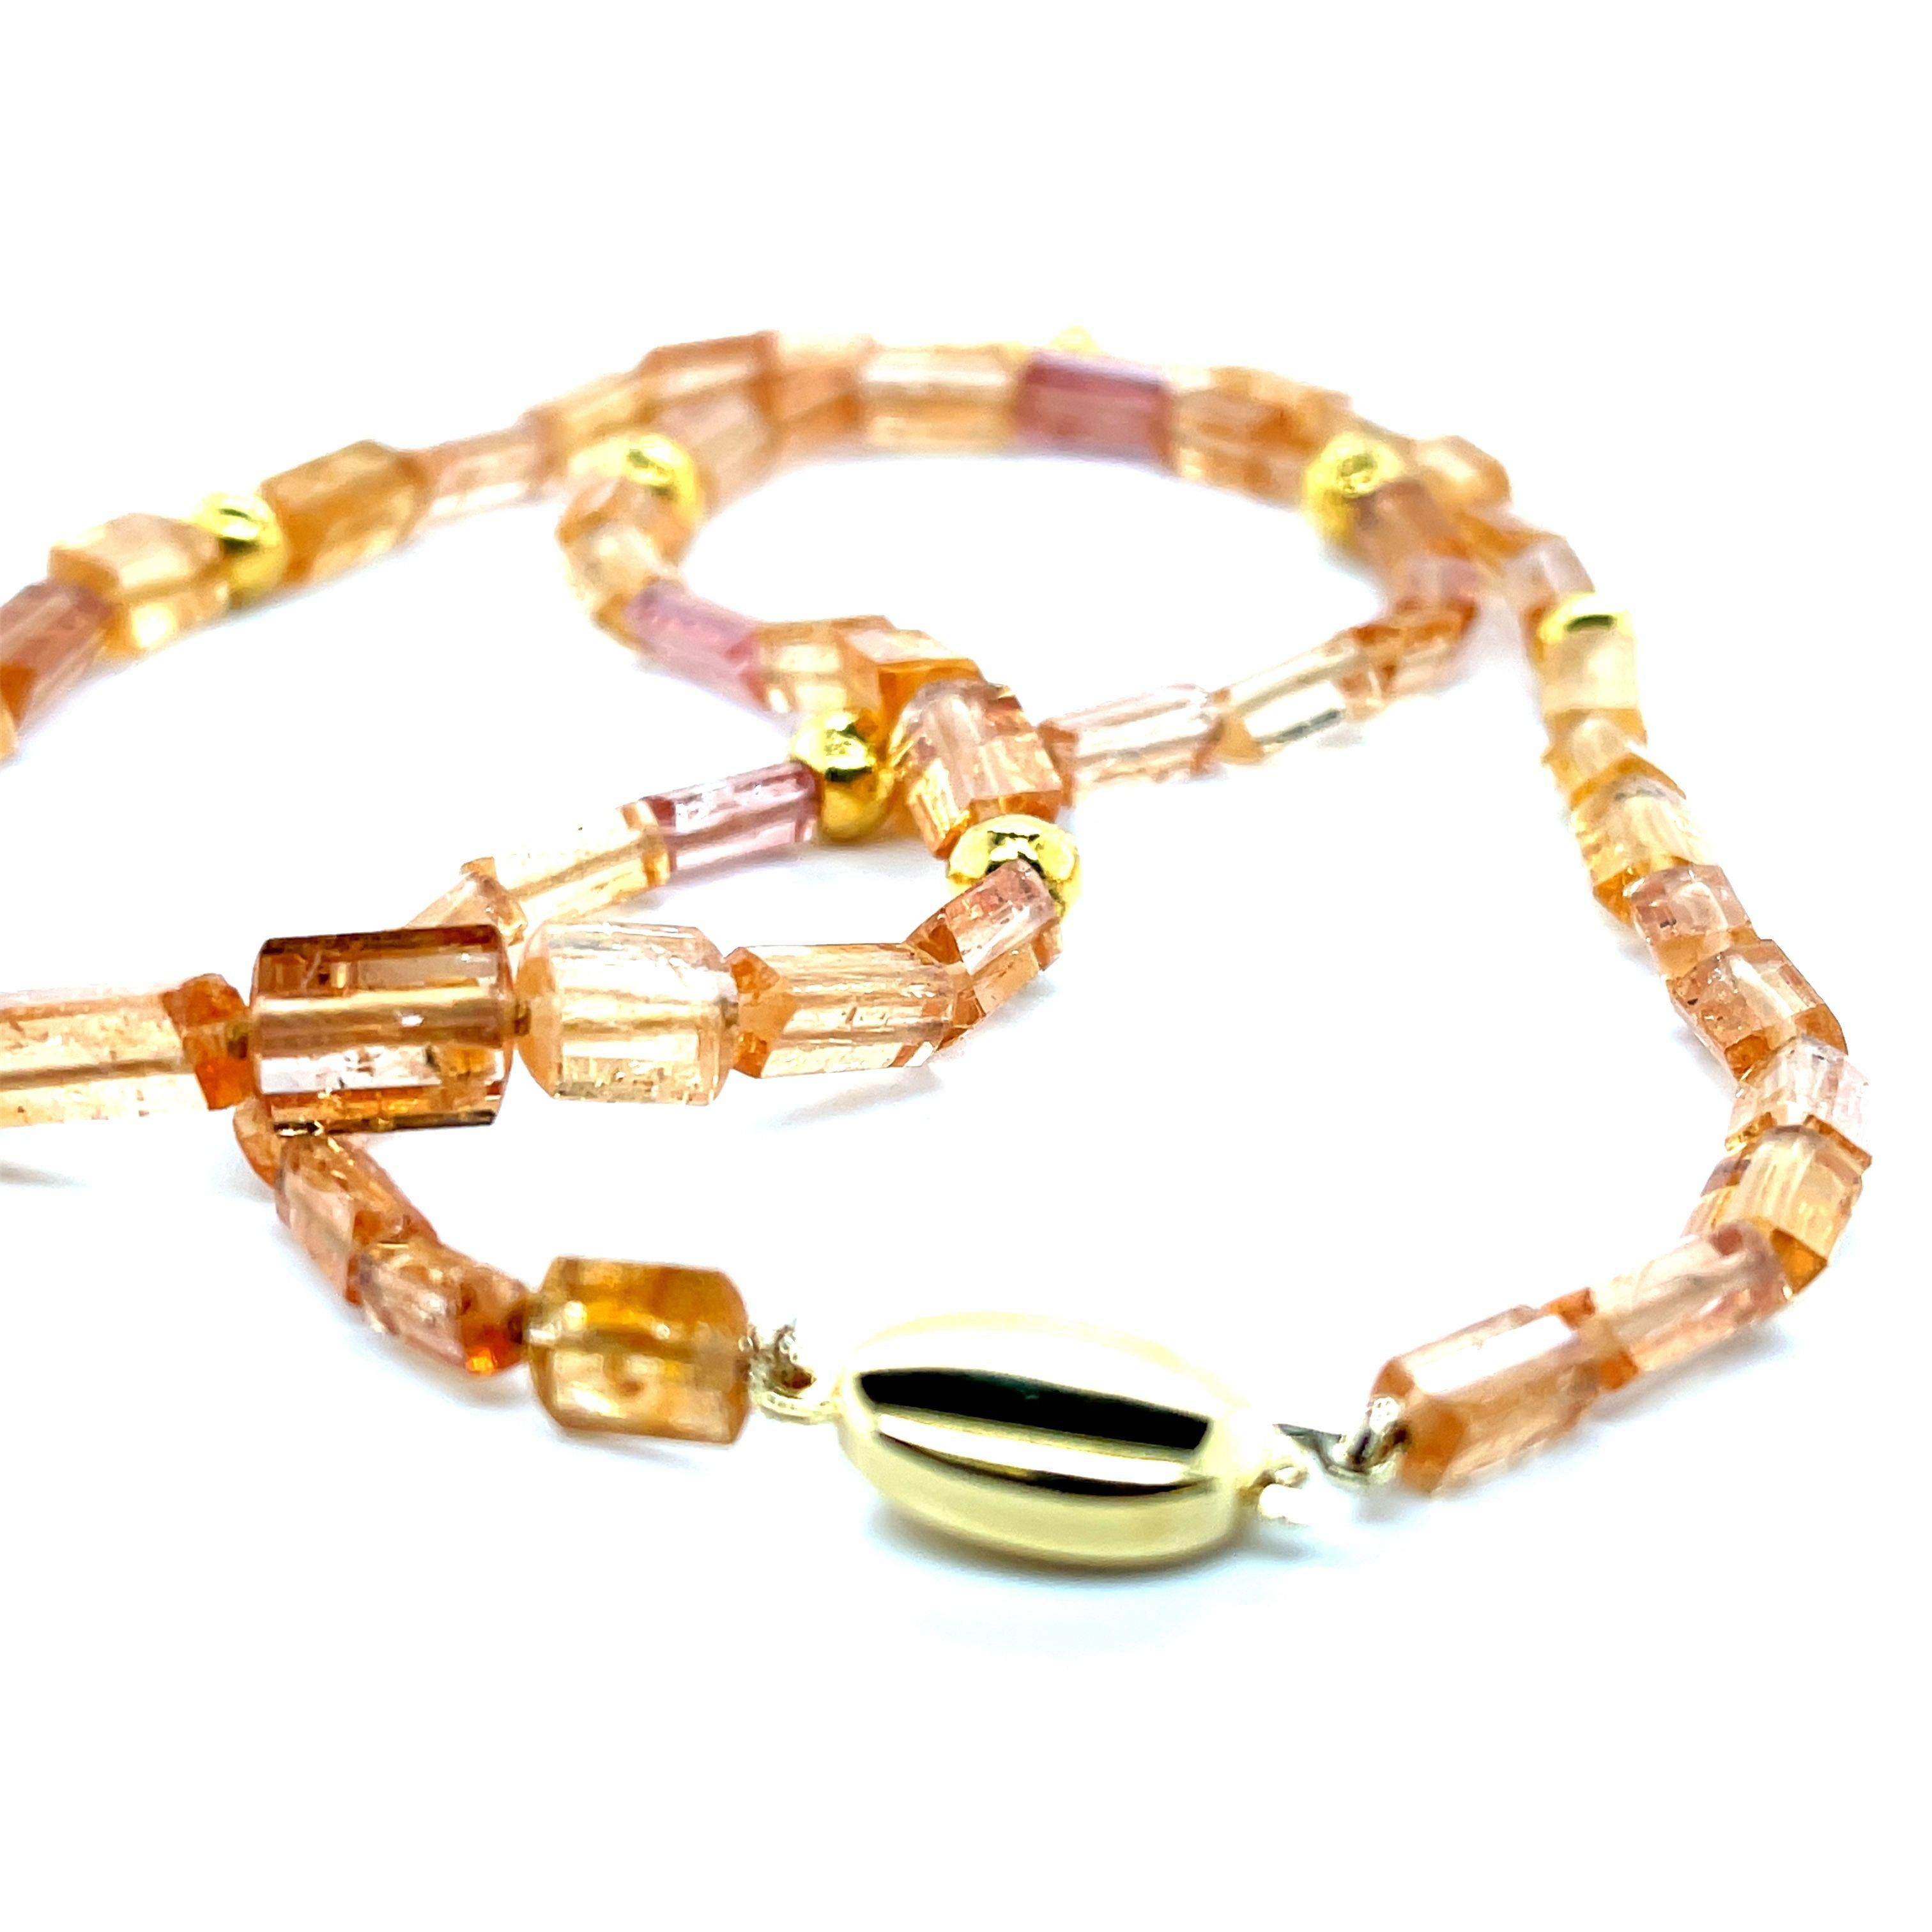 Artisan Faceted Imperial Topaz Beaded Necklace with Yellow Gold Spacers, 20.5 Inches For Sale